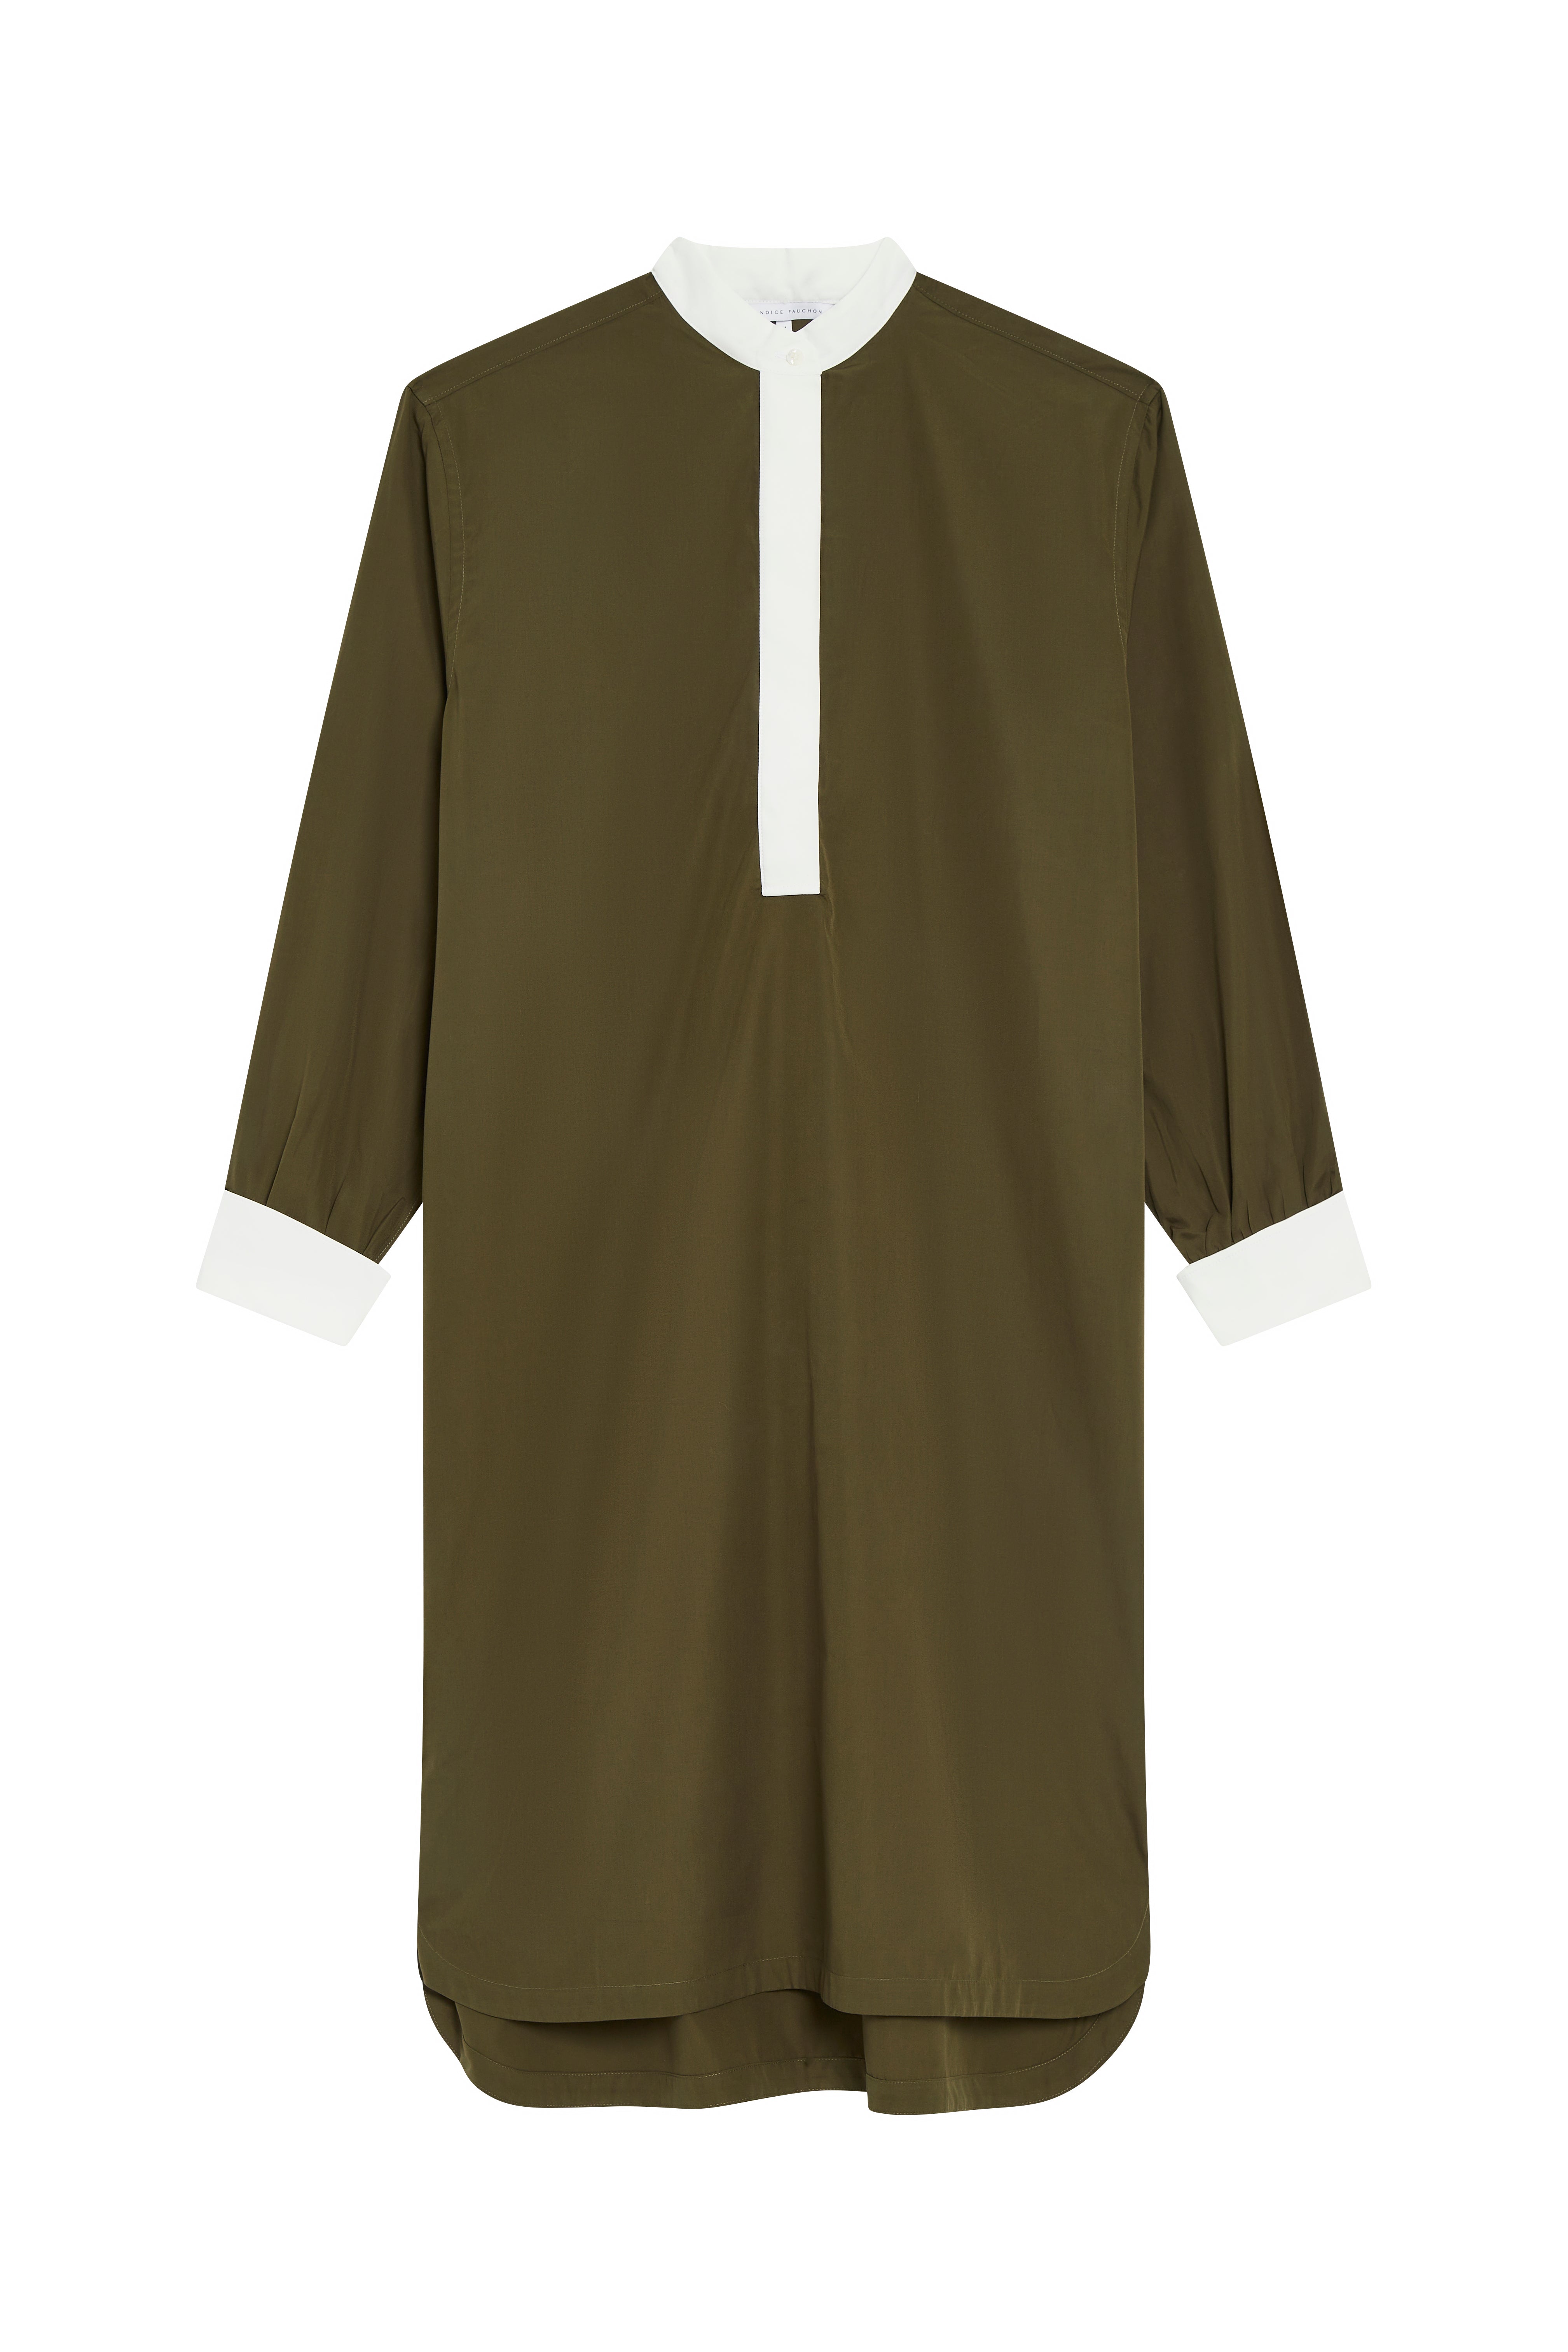 The Eddie in army green cotton broadcloth